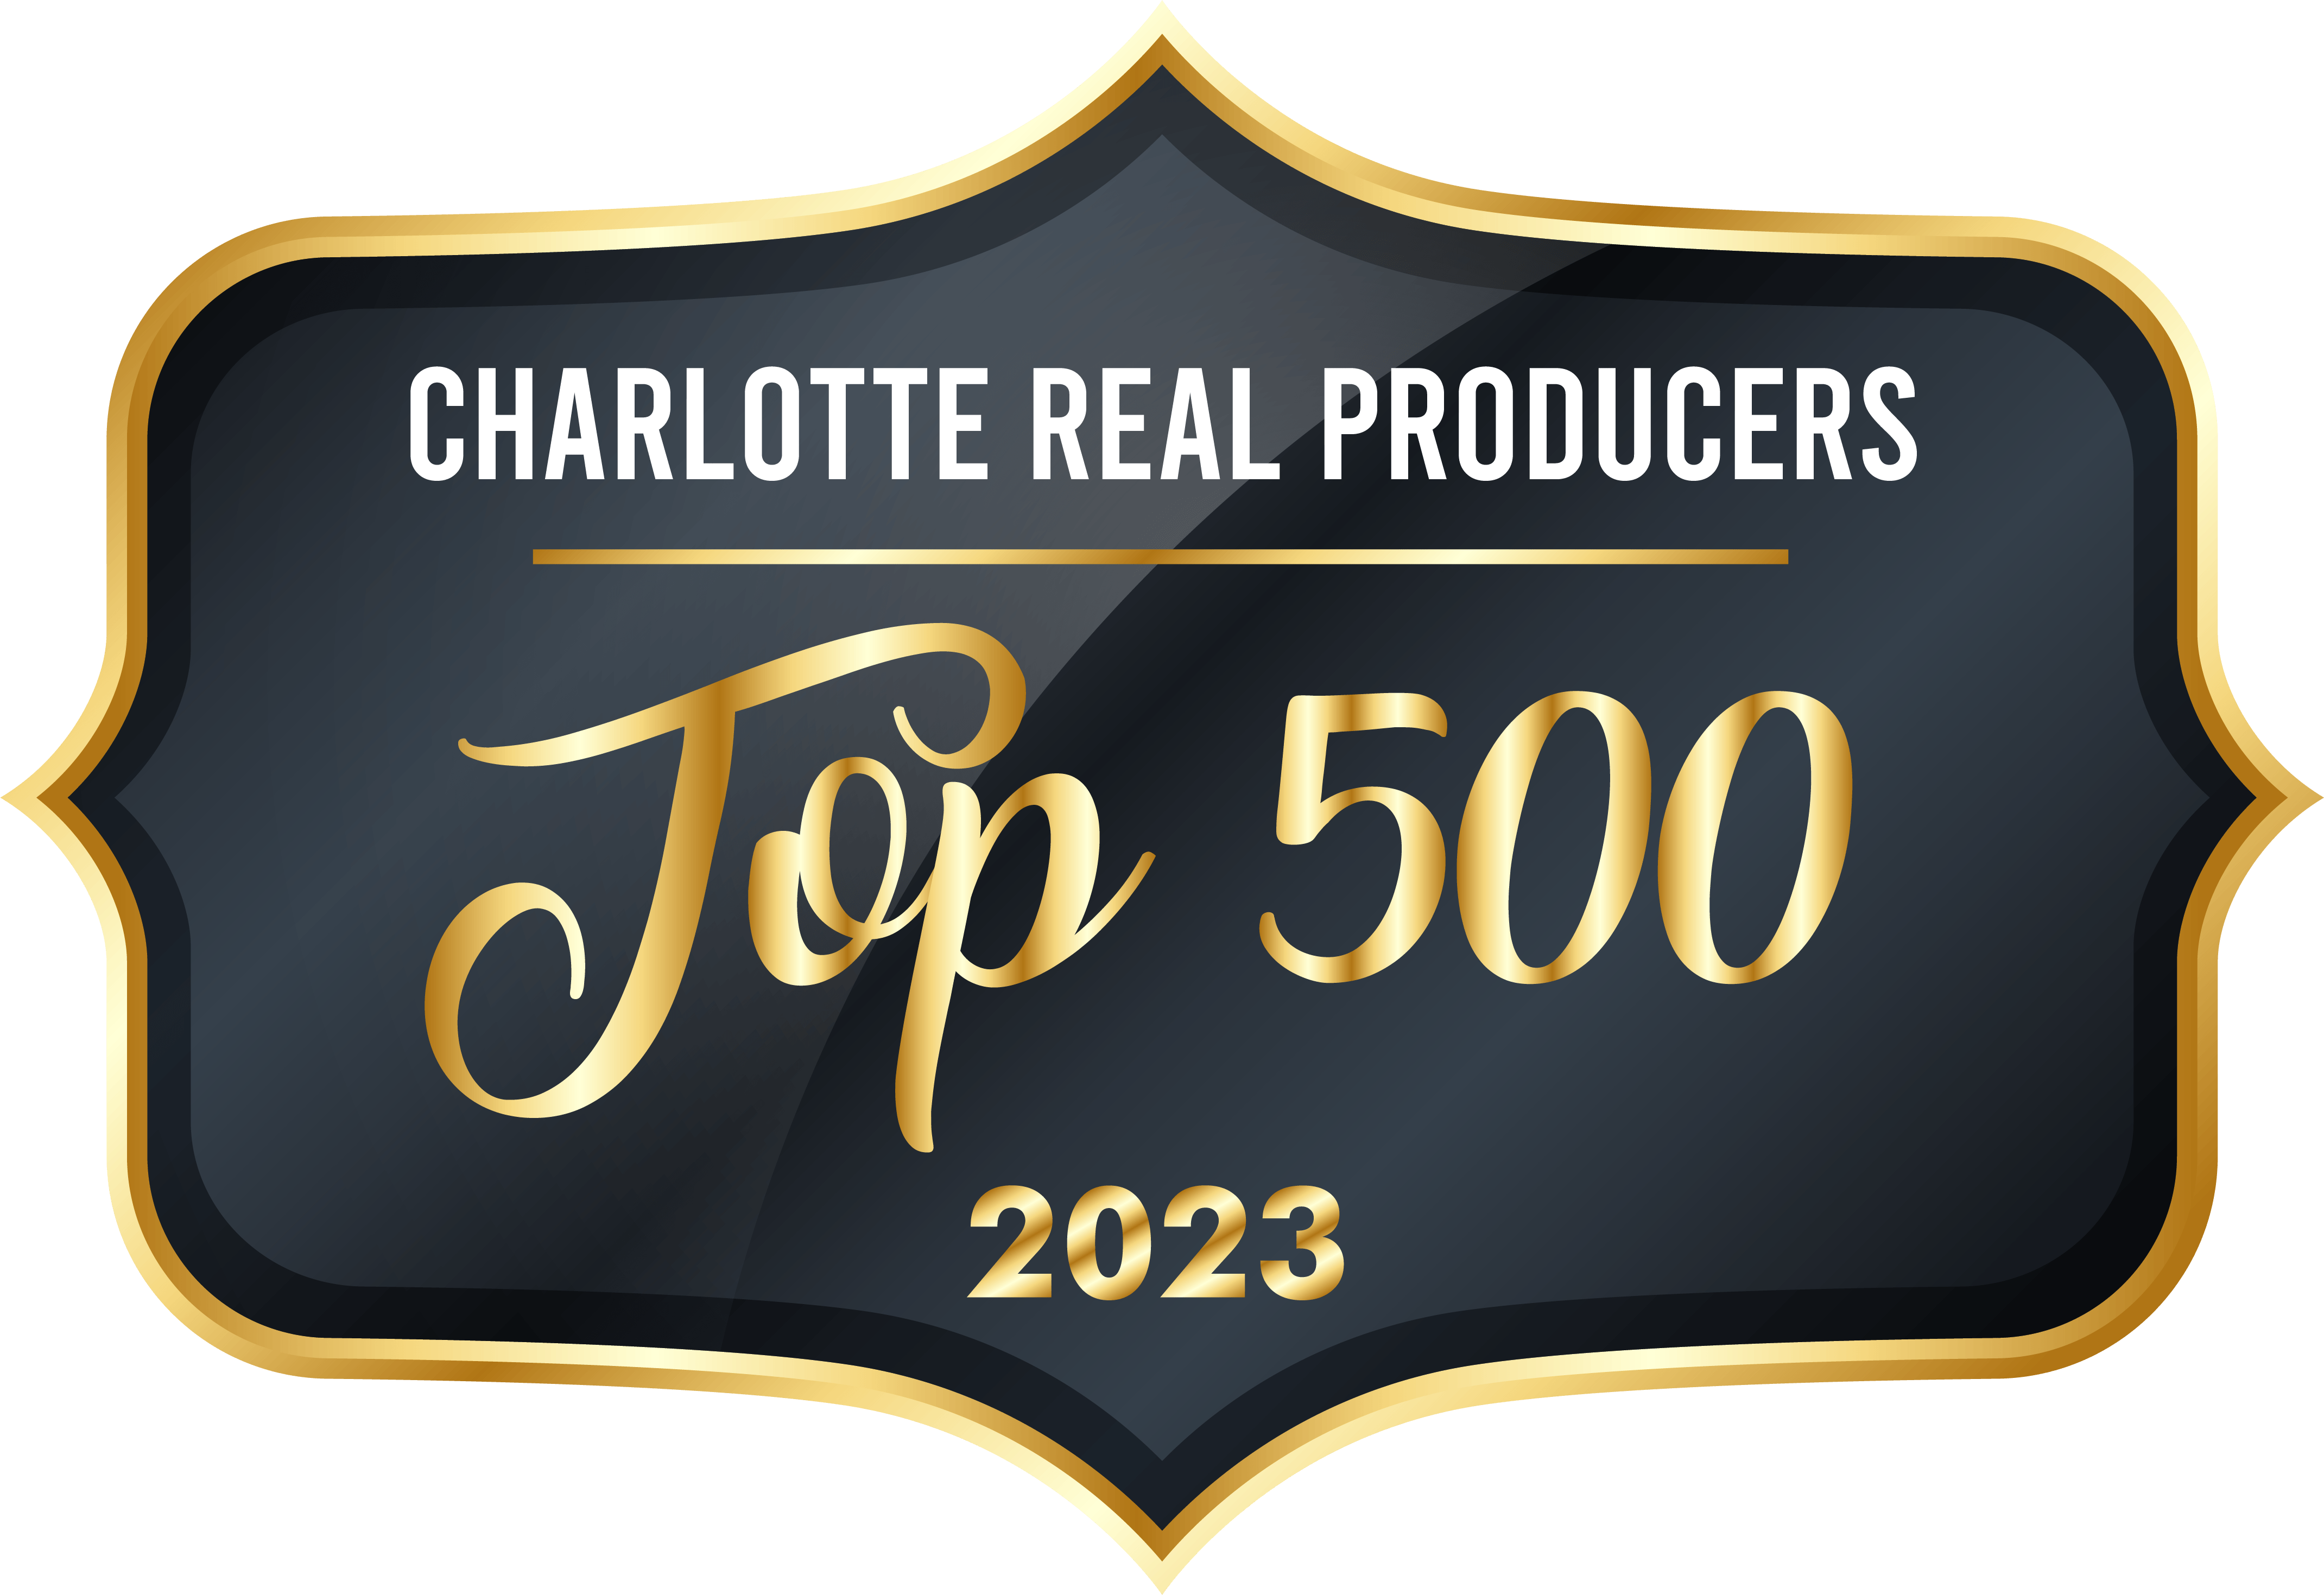 A text banner describing Charlotte Real Producers